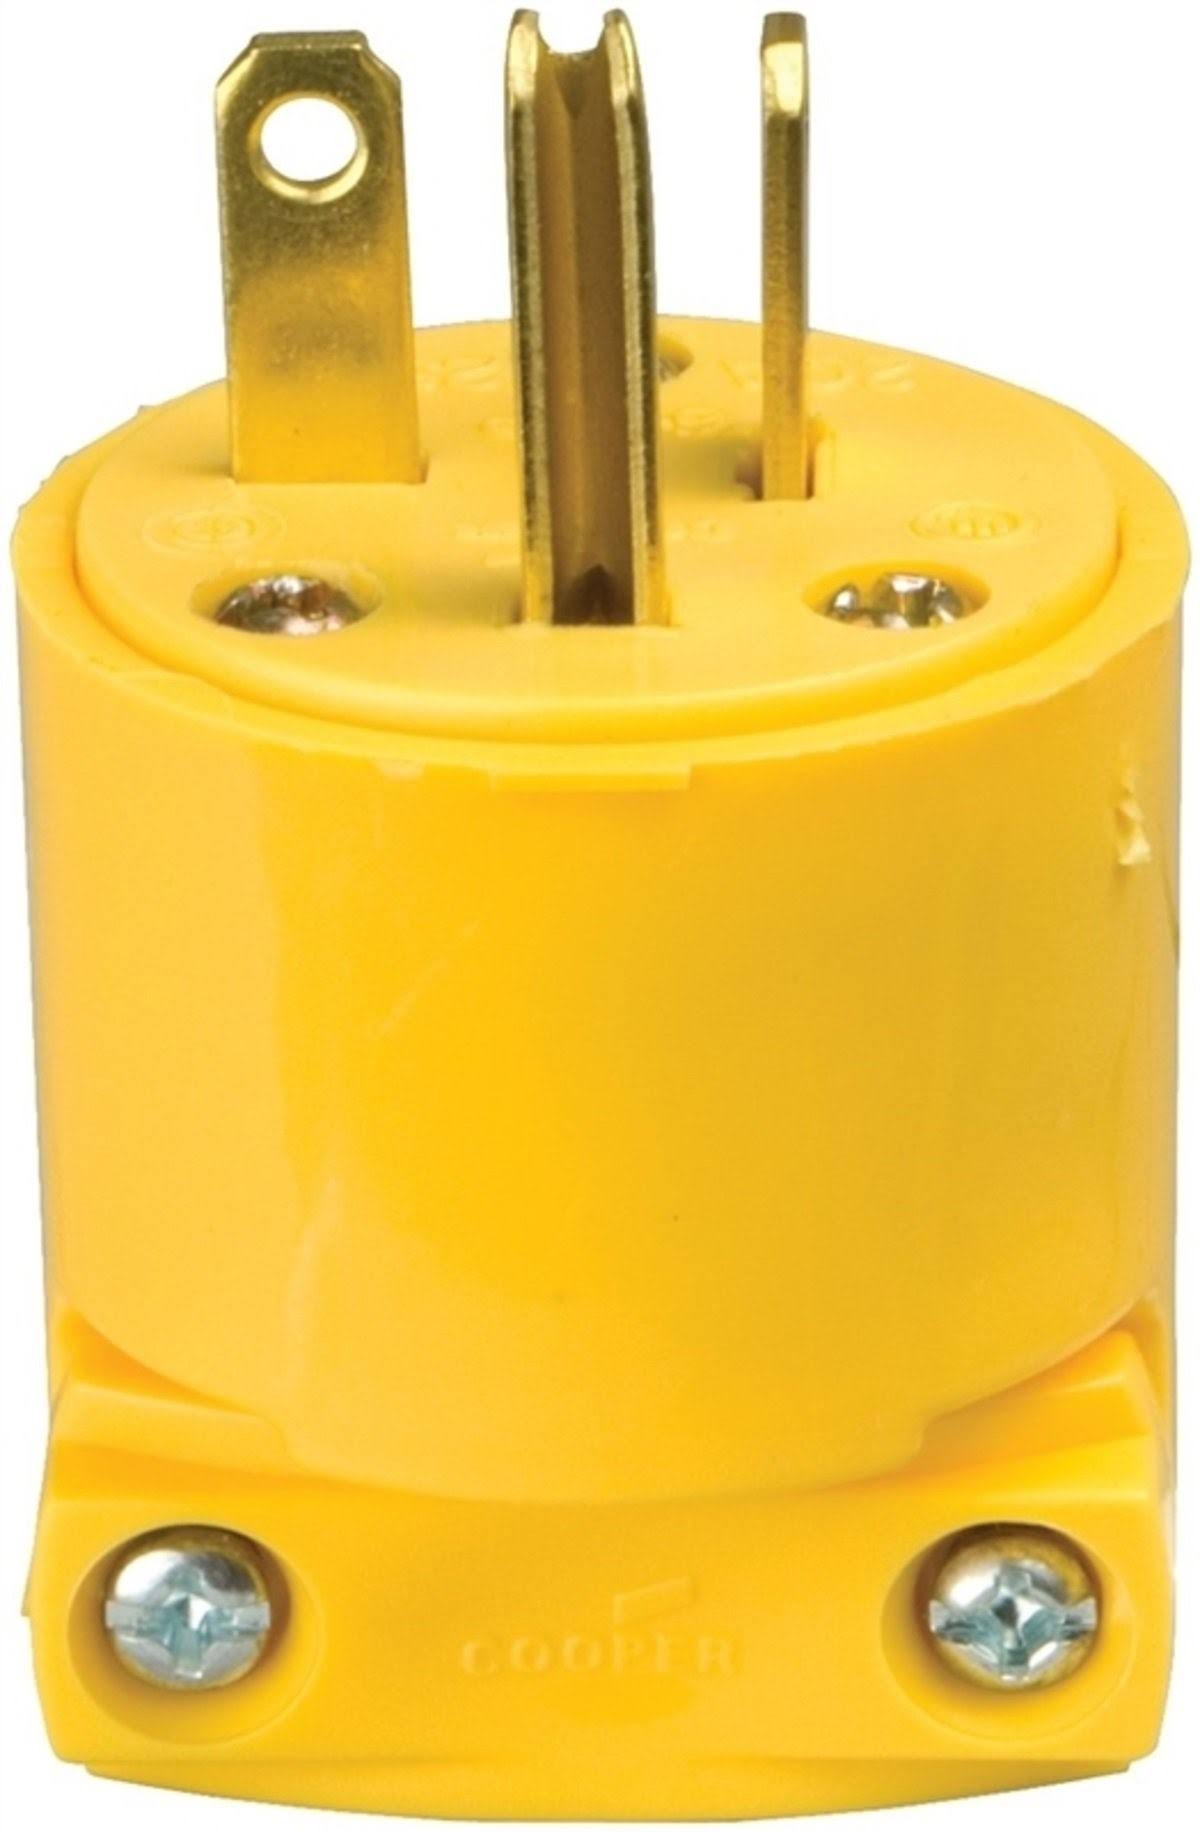 Cooper Wiring Devices Plug - Yellow, 20amp, 250v, 3 Wire